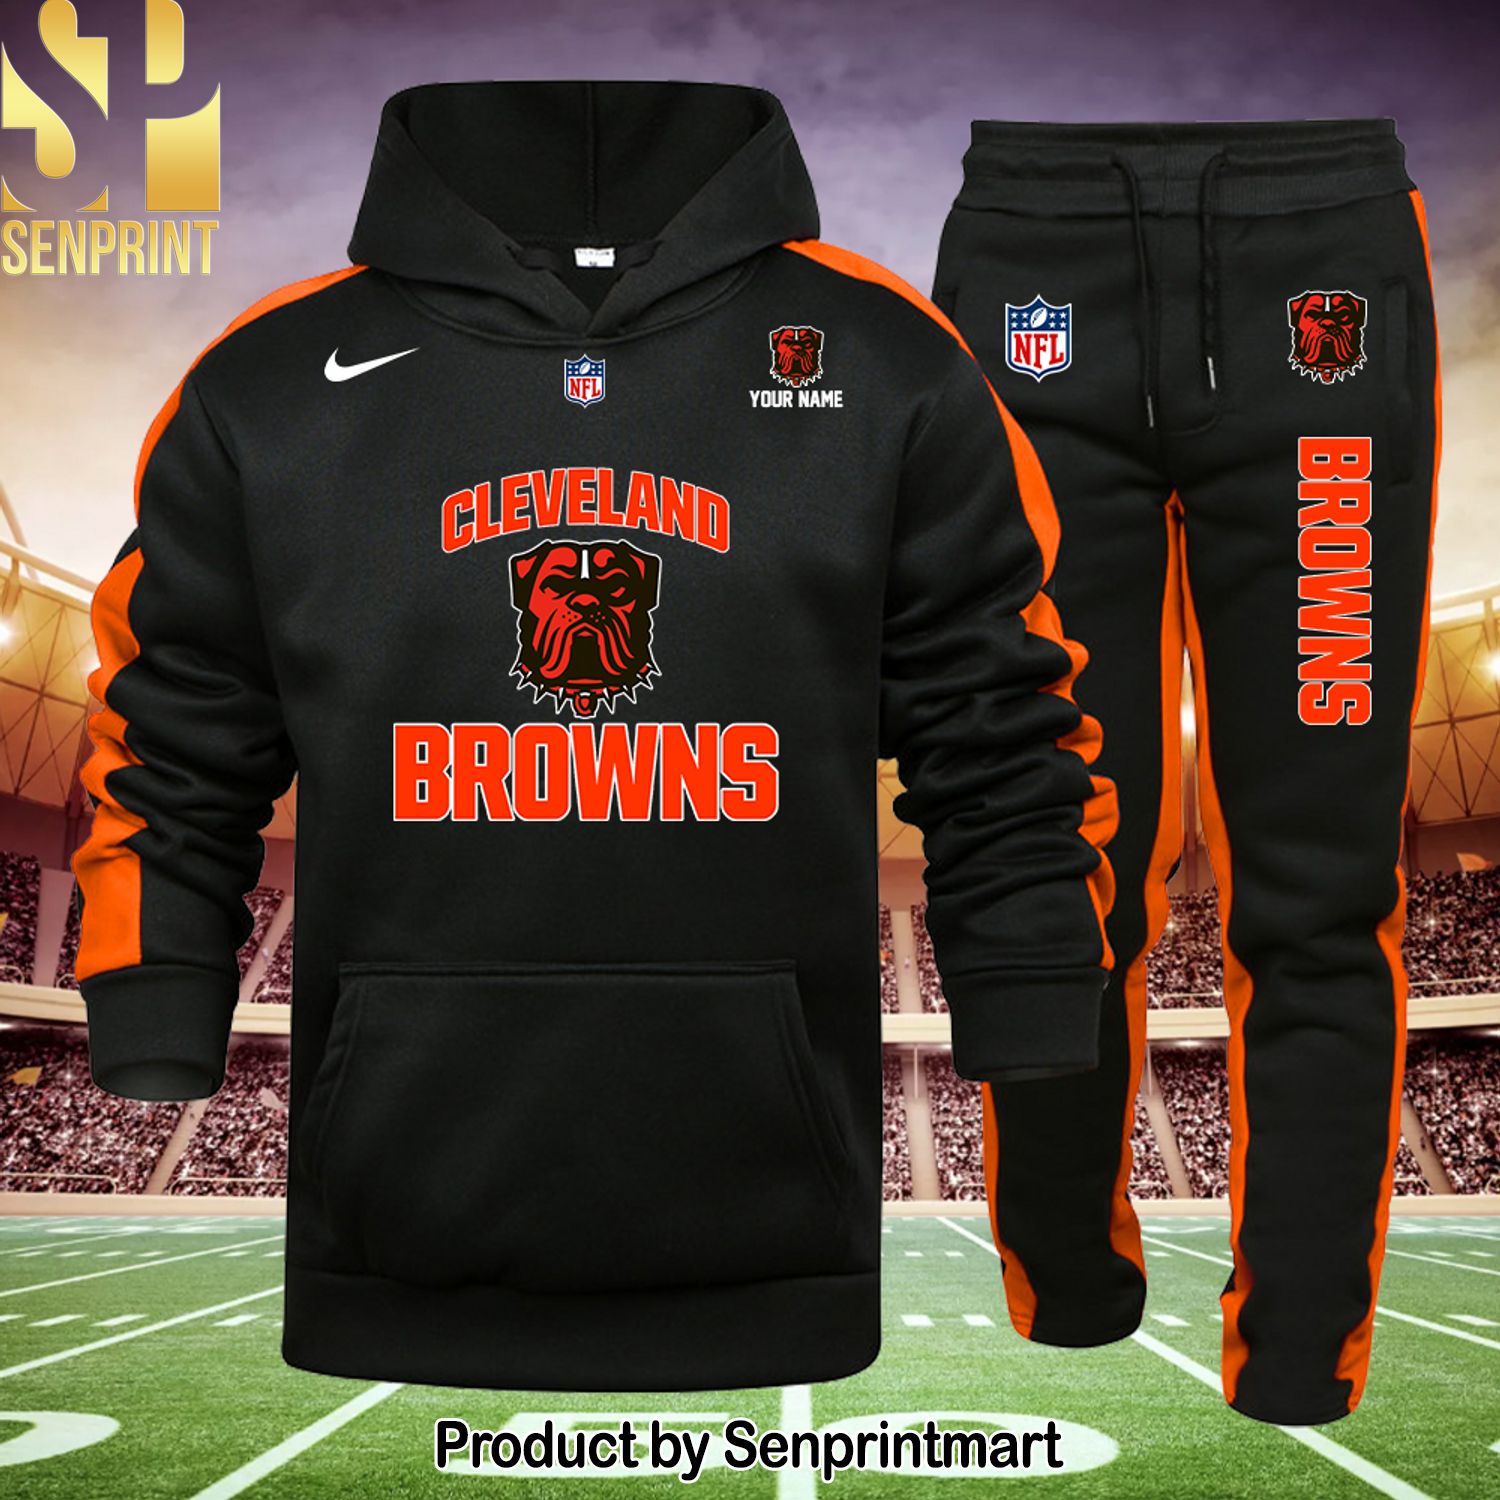 NFL Cleveland Browns Amazing Outfit Shirt and Sweatpants